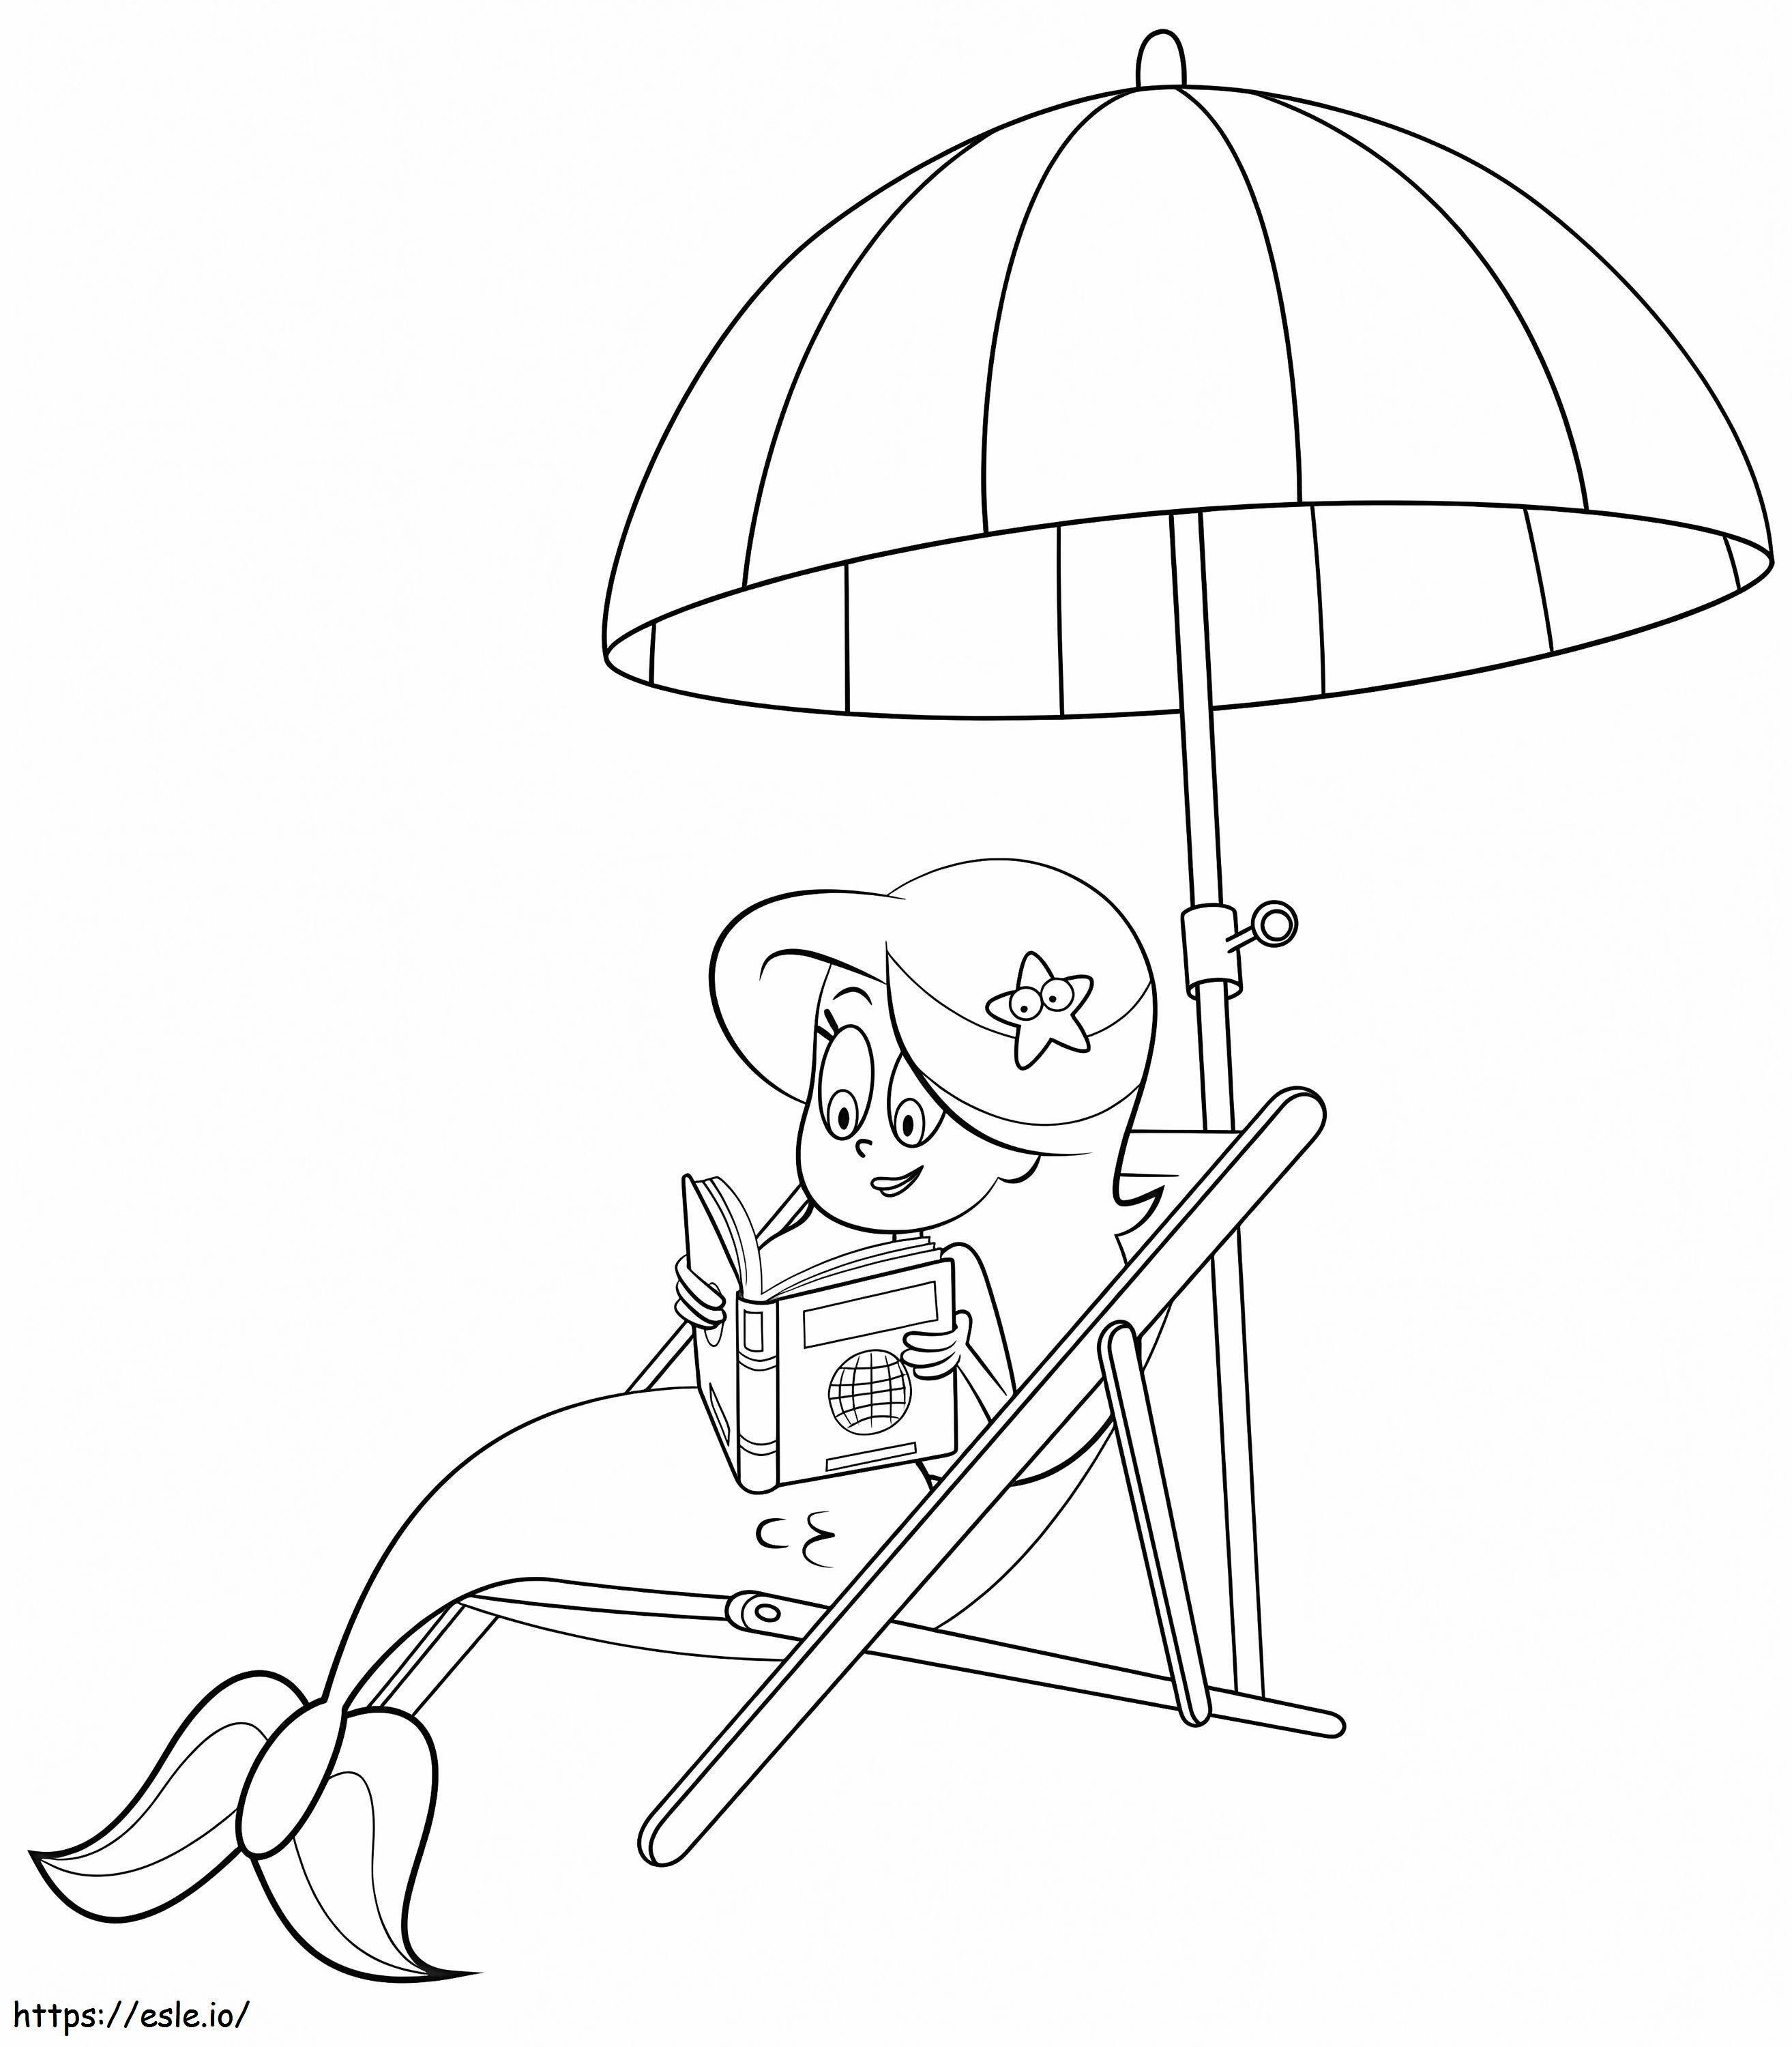 Marina Relaxing coloring page